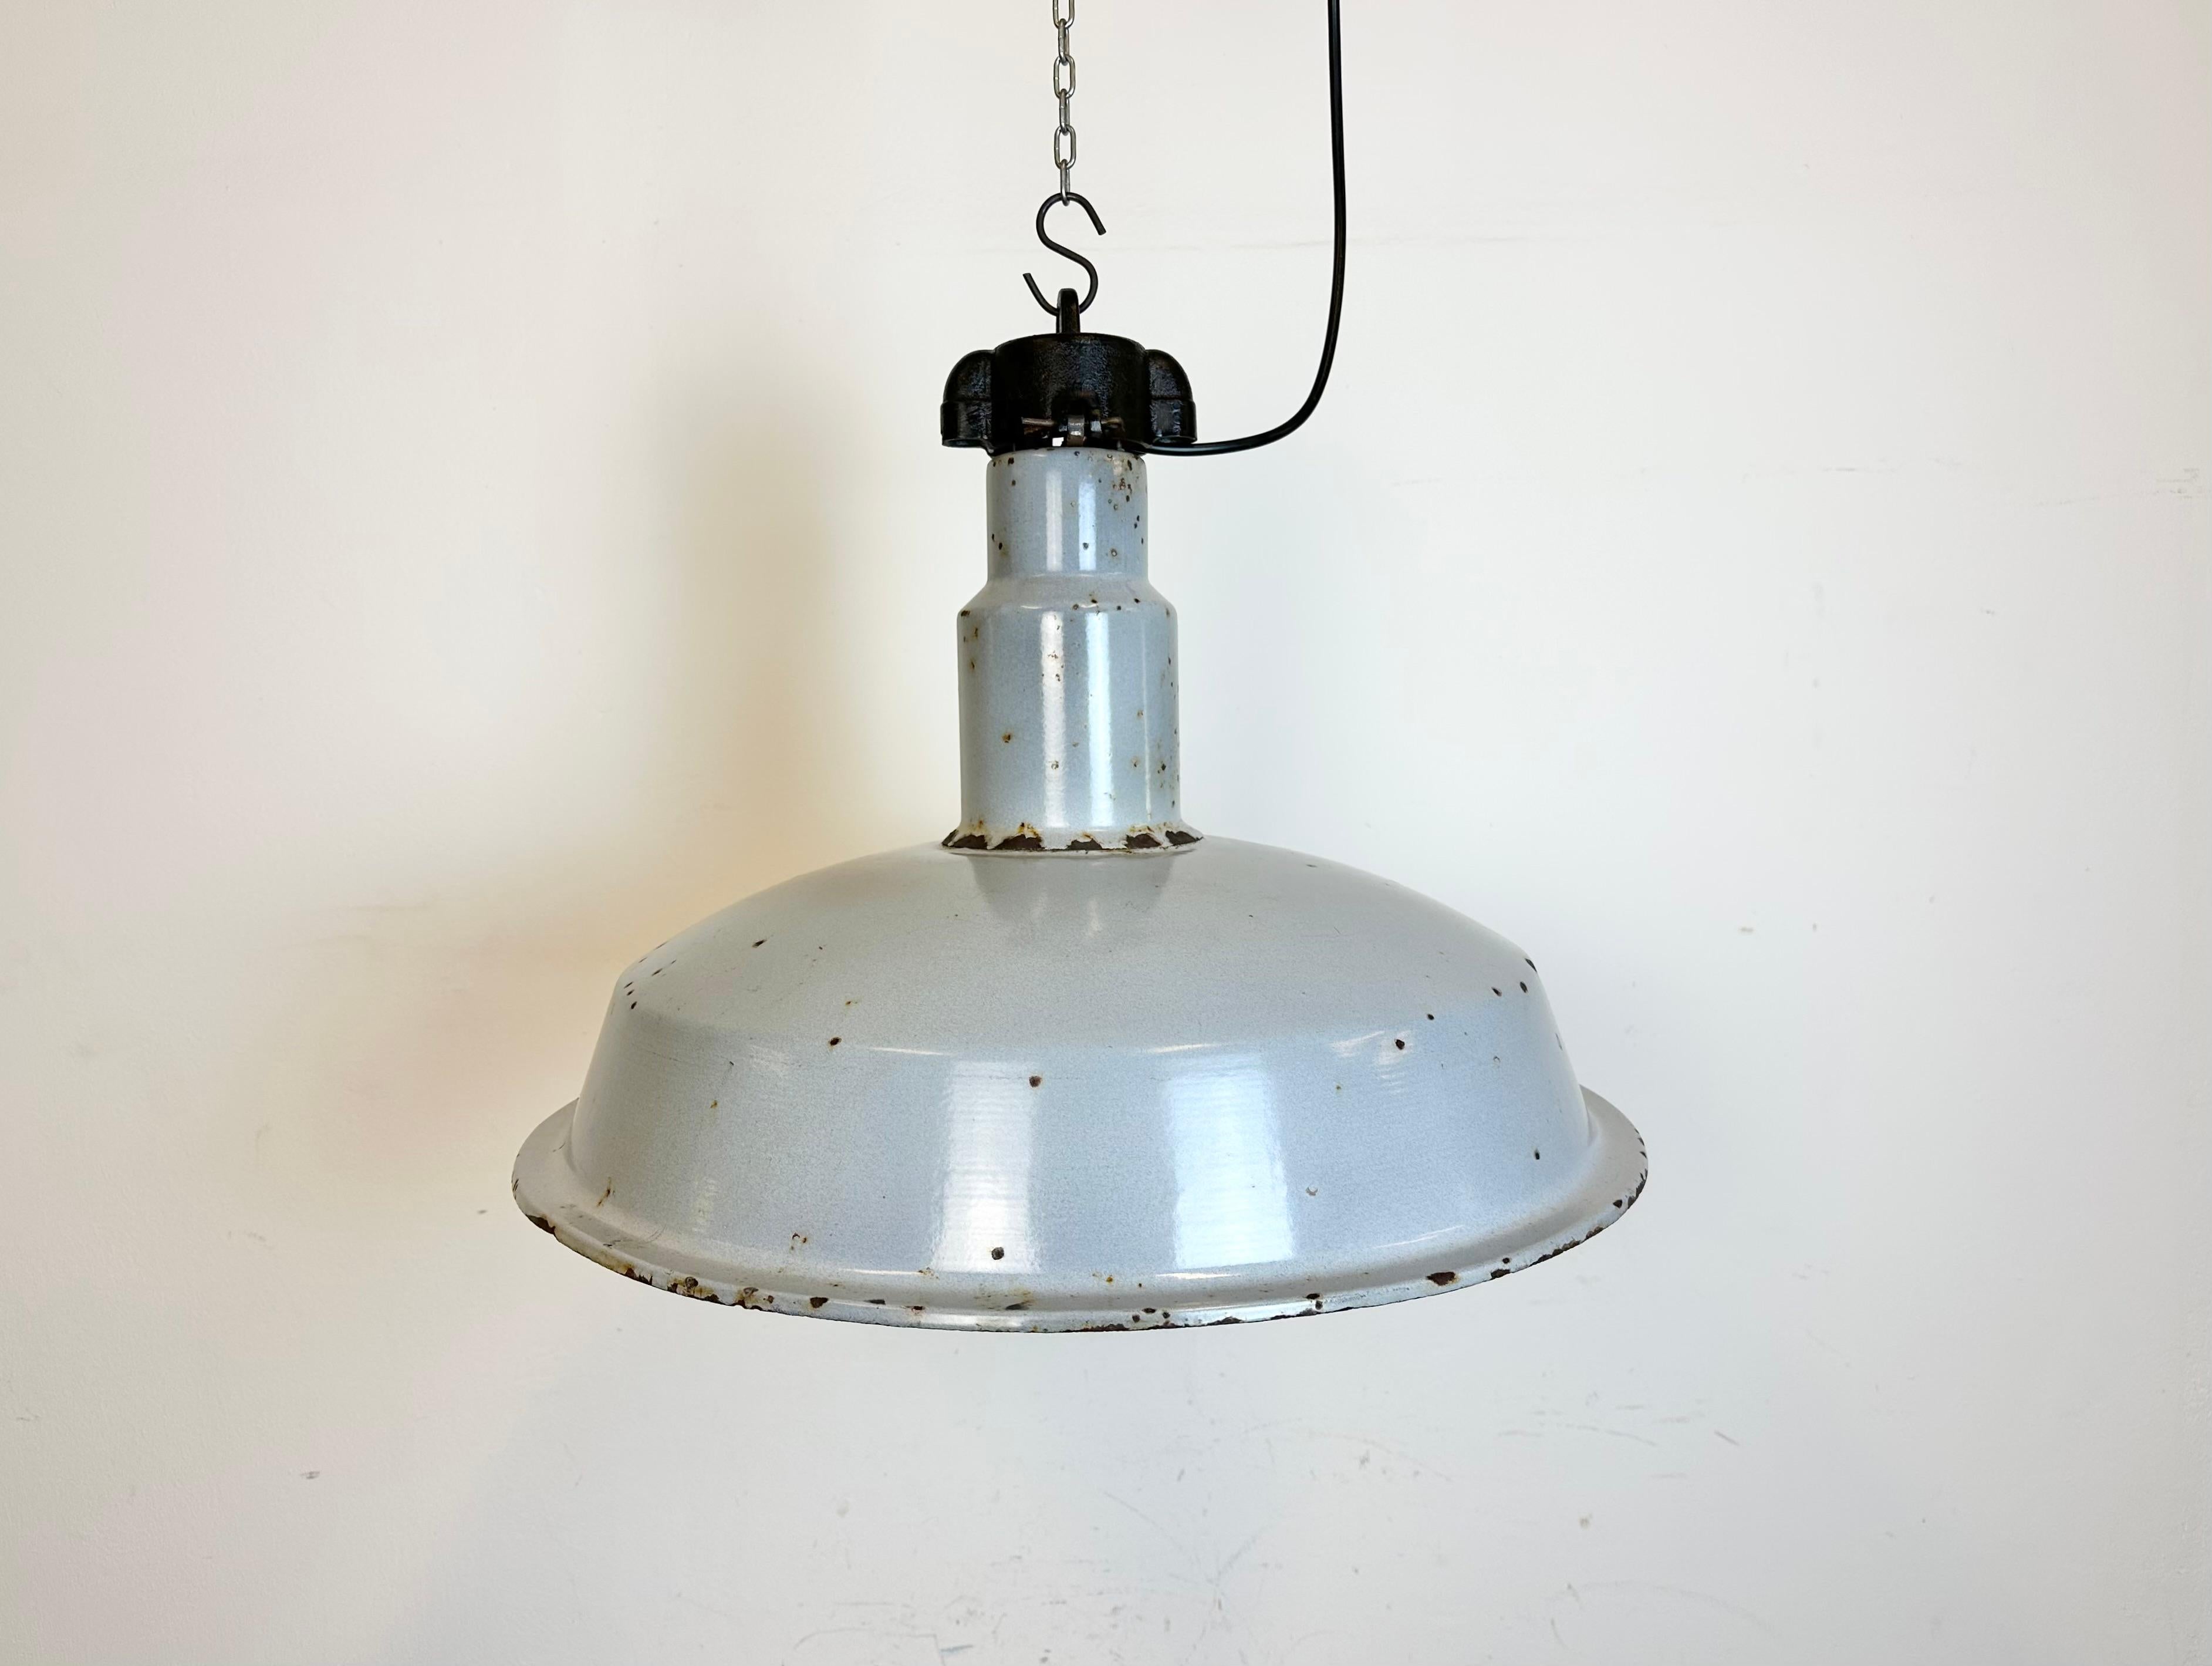 This industrial lamp was made in former Czechoslovakia during the 1950s. It features grey enamel shade with white interior. Cast iron top. New porcelain socket reqiures standard E 27 / E26 lightbulbs. New wire. The diameter of the shade is 55 cm.